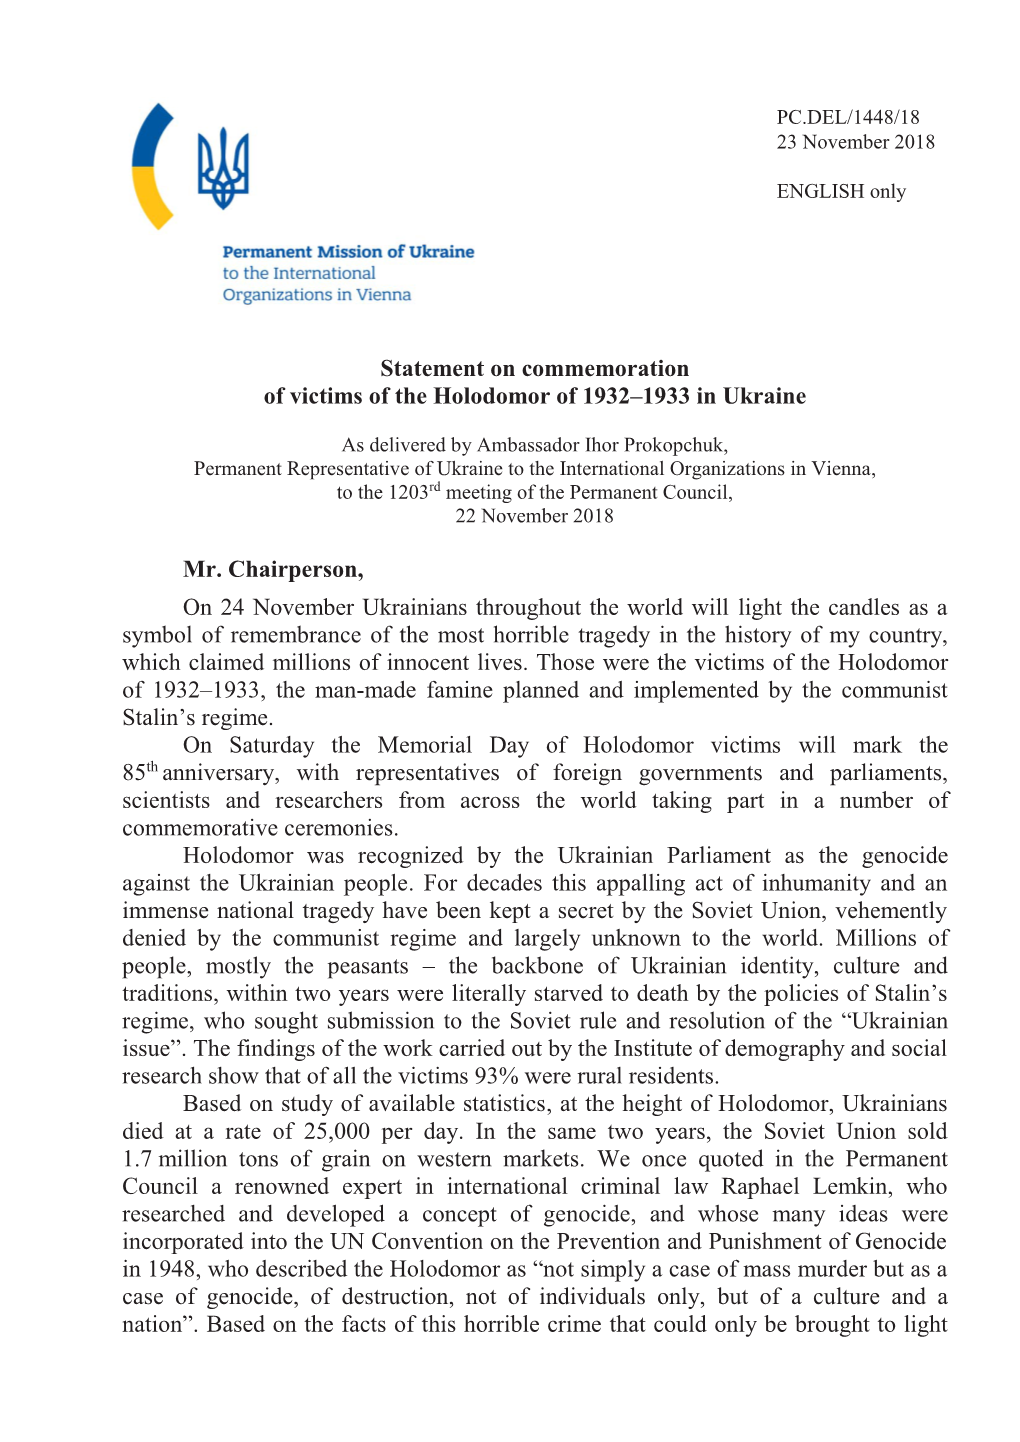 Statement on Commemoration of Victims of the Holodomor of 1932–1933 in Ukraine